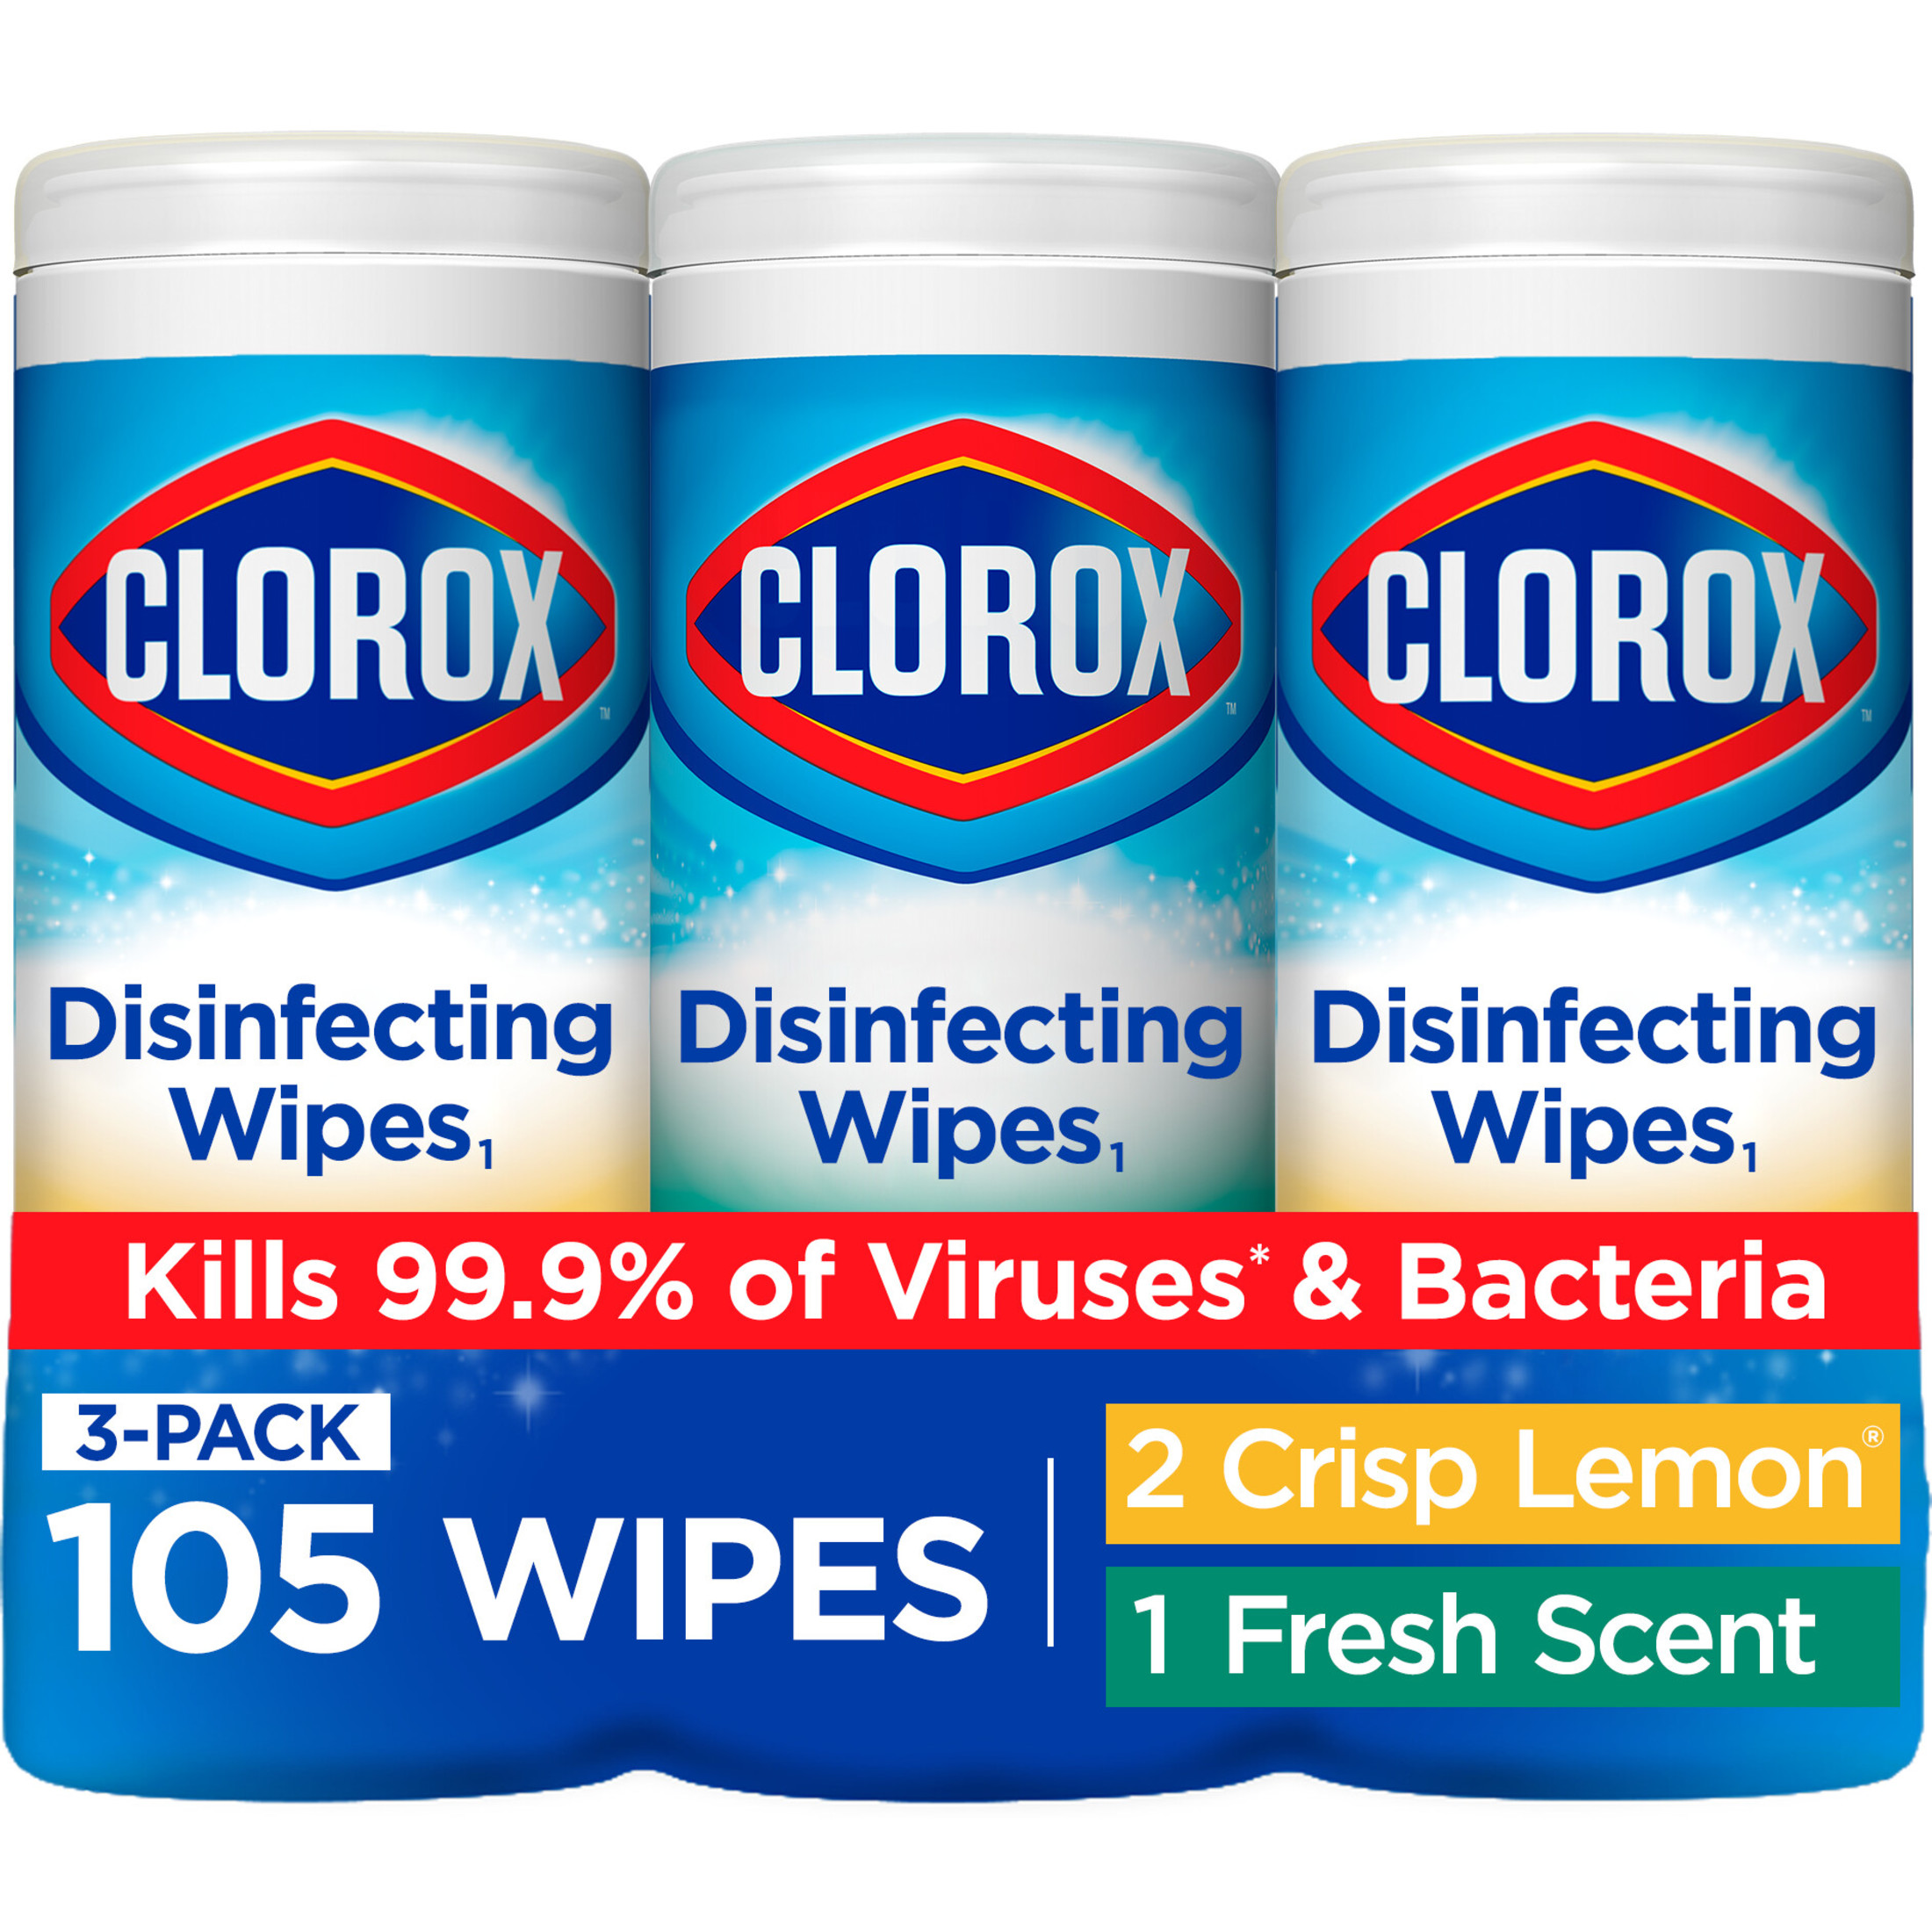 Clorox Disinfecting Wipes (105 Count Value Pack), Bleach Free Cleaning Wipes - 3 Pack - 35 Count Each - image 1 of 10